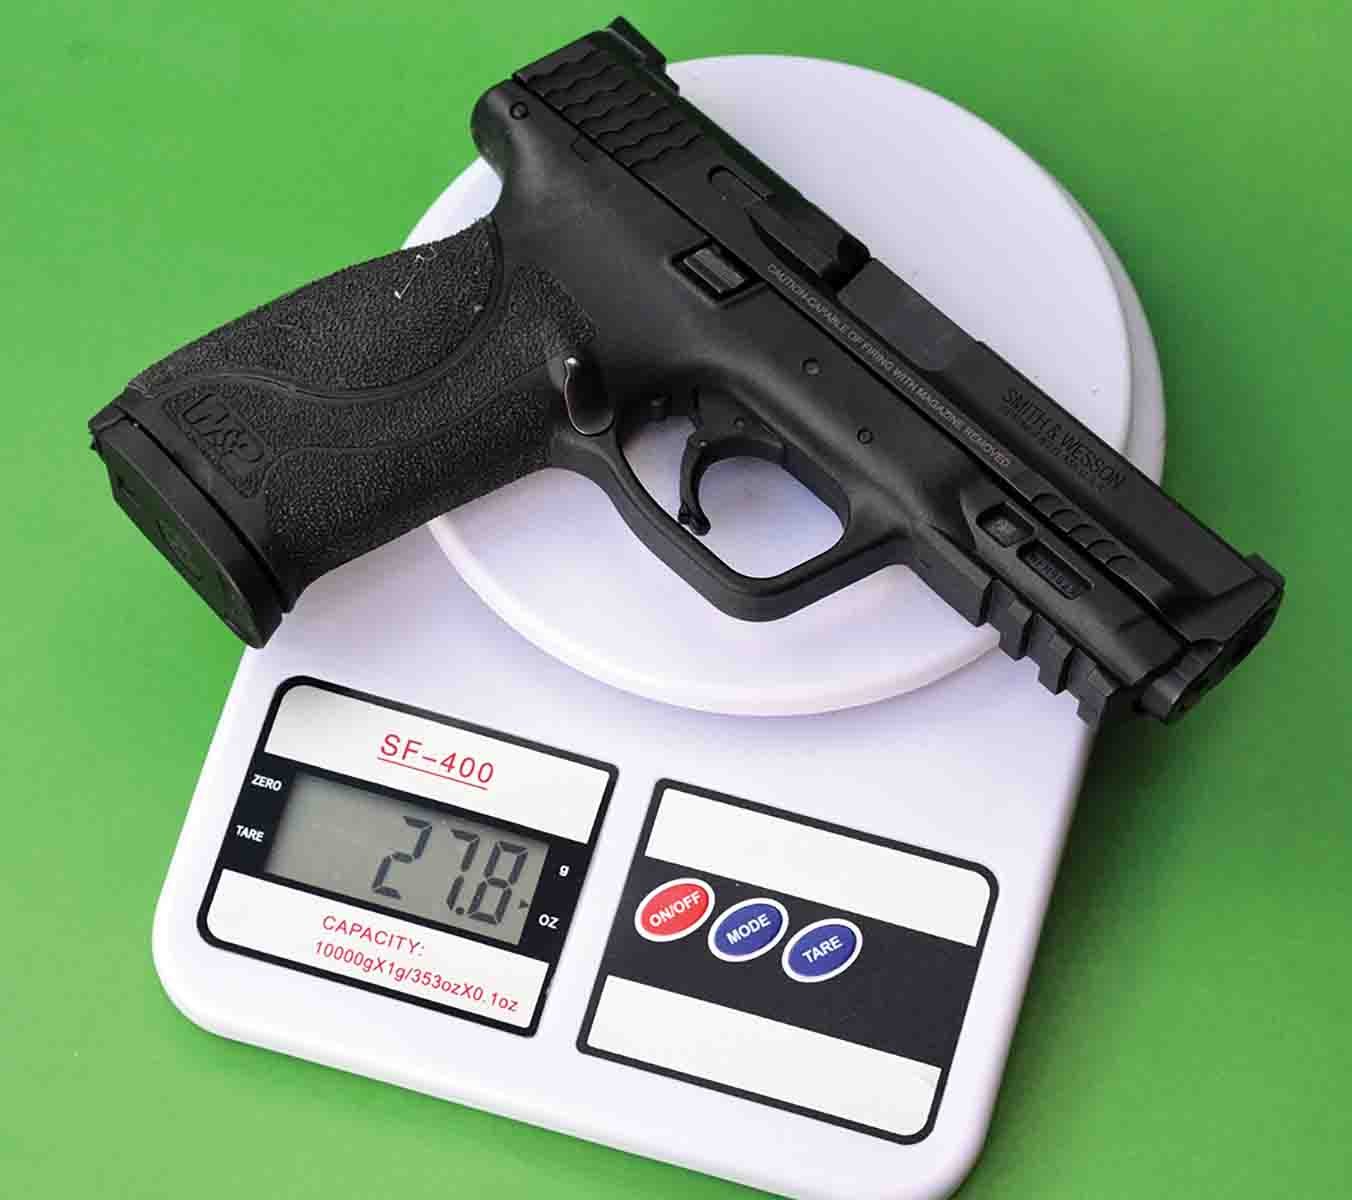 With a 17-round steel magazine installed, the Smith & Wesson M&P M2.0 9mm weighed 27.8 ounces.